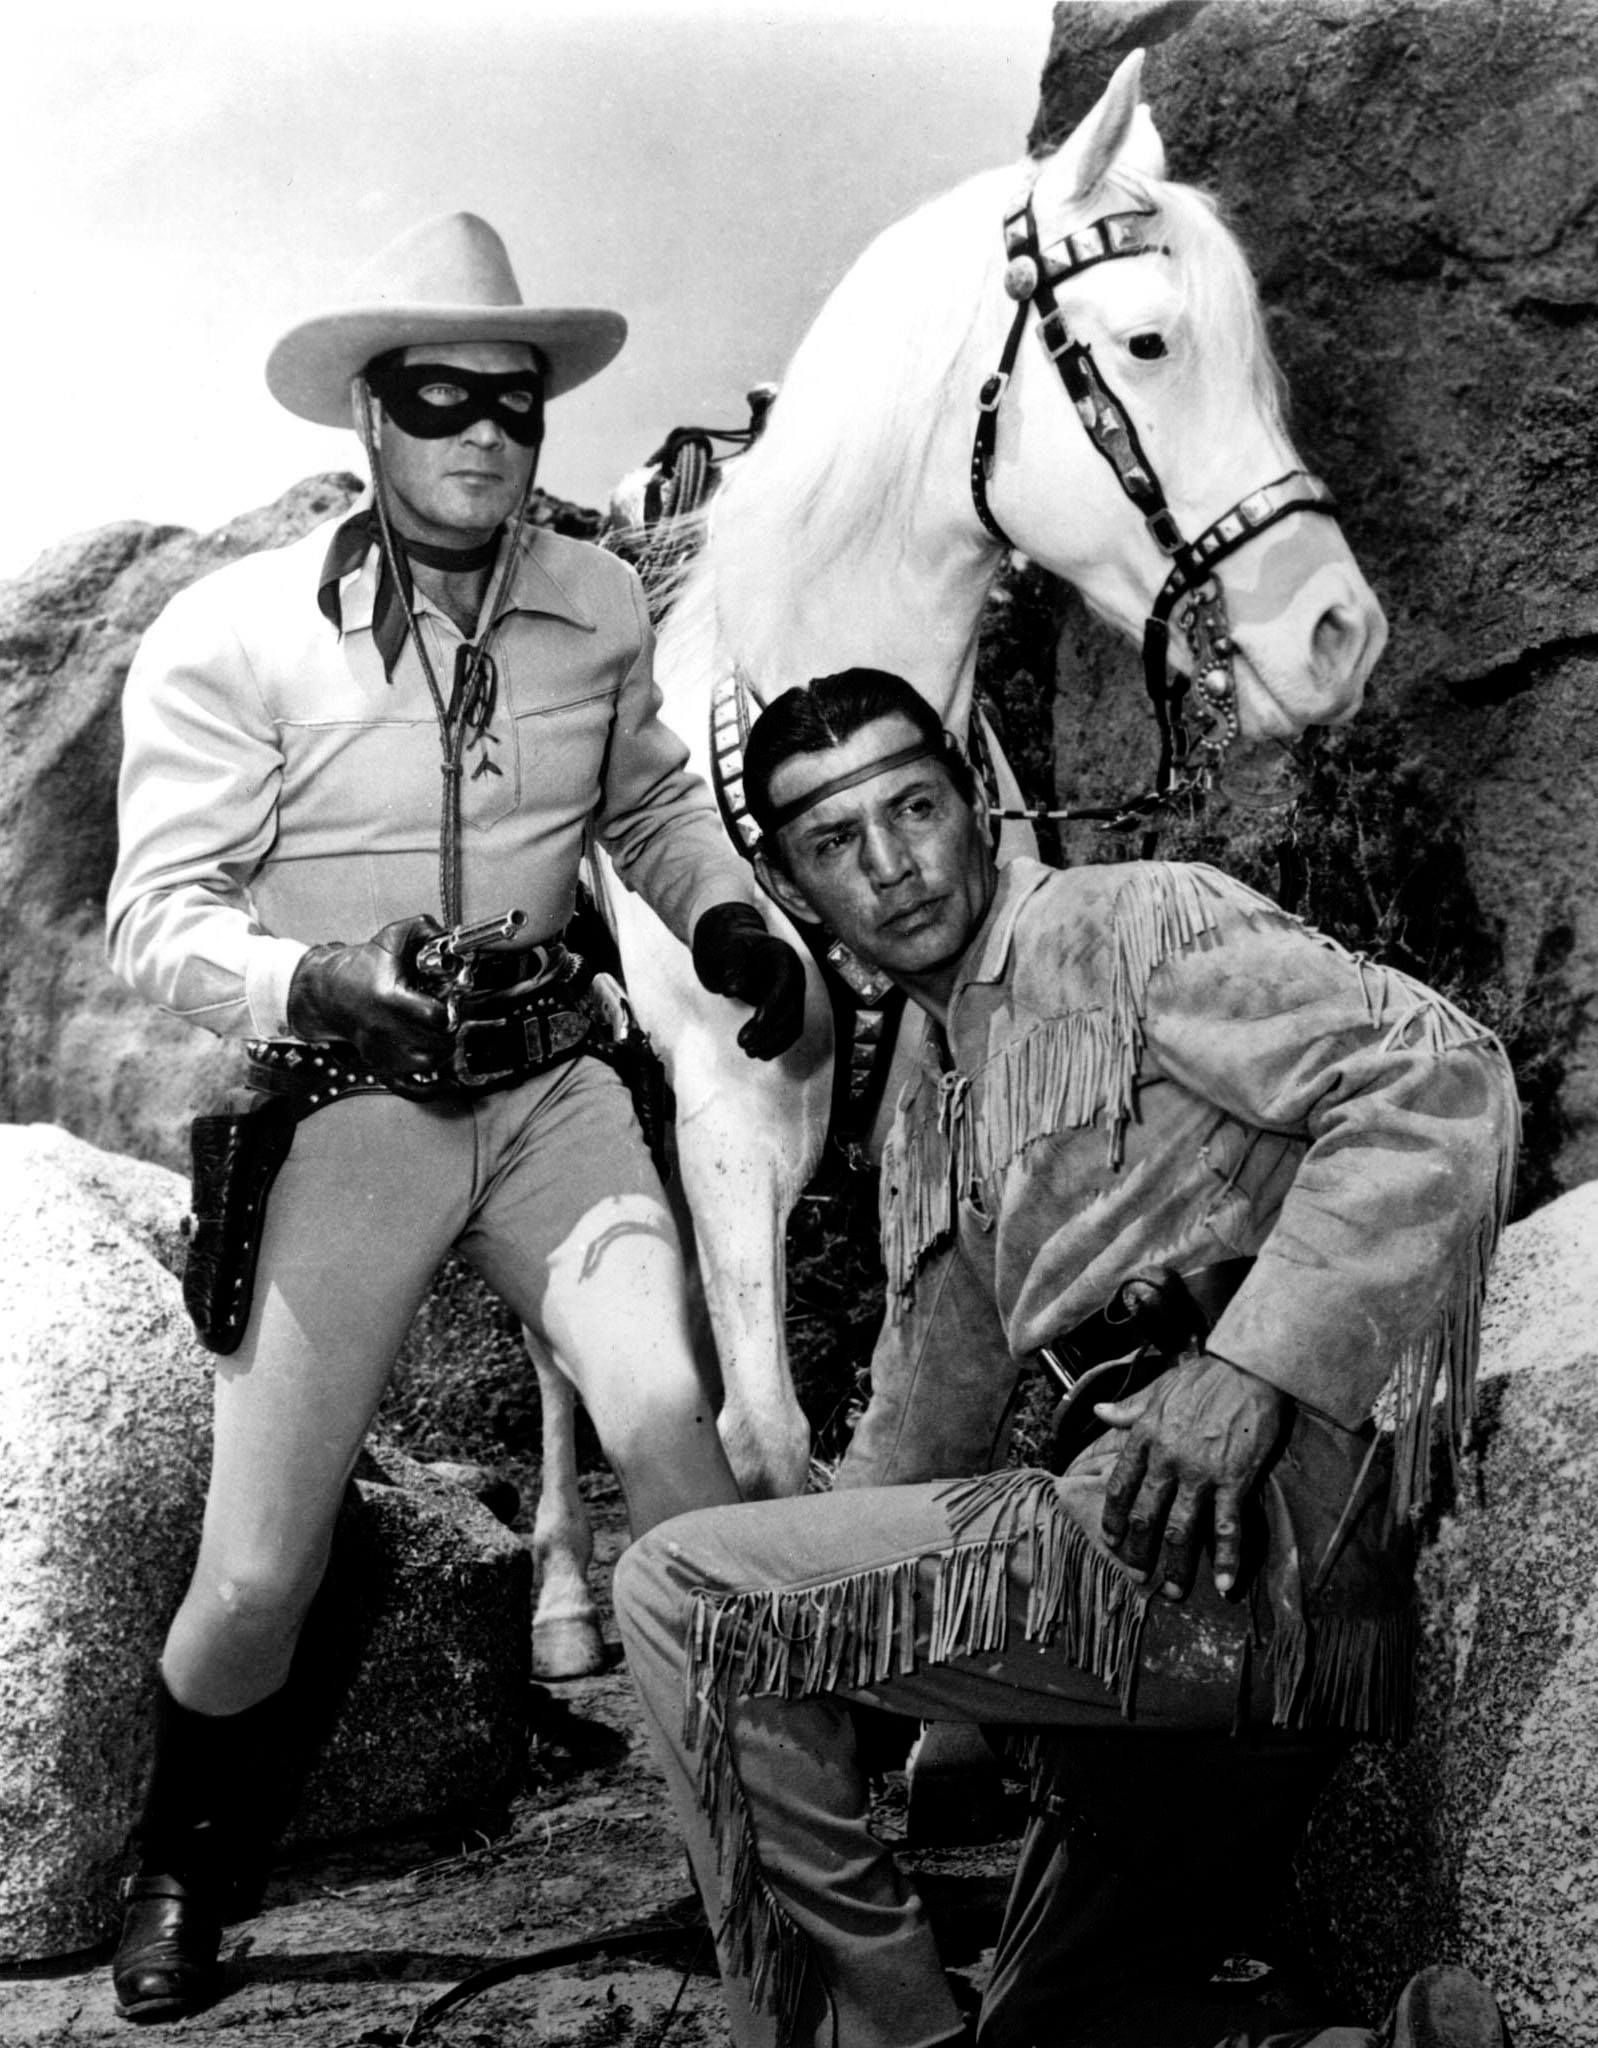 Here's a great photo of birthday star Jay Silverheels as Tonto and ...